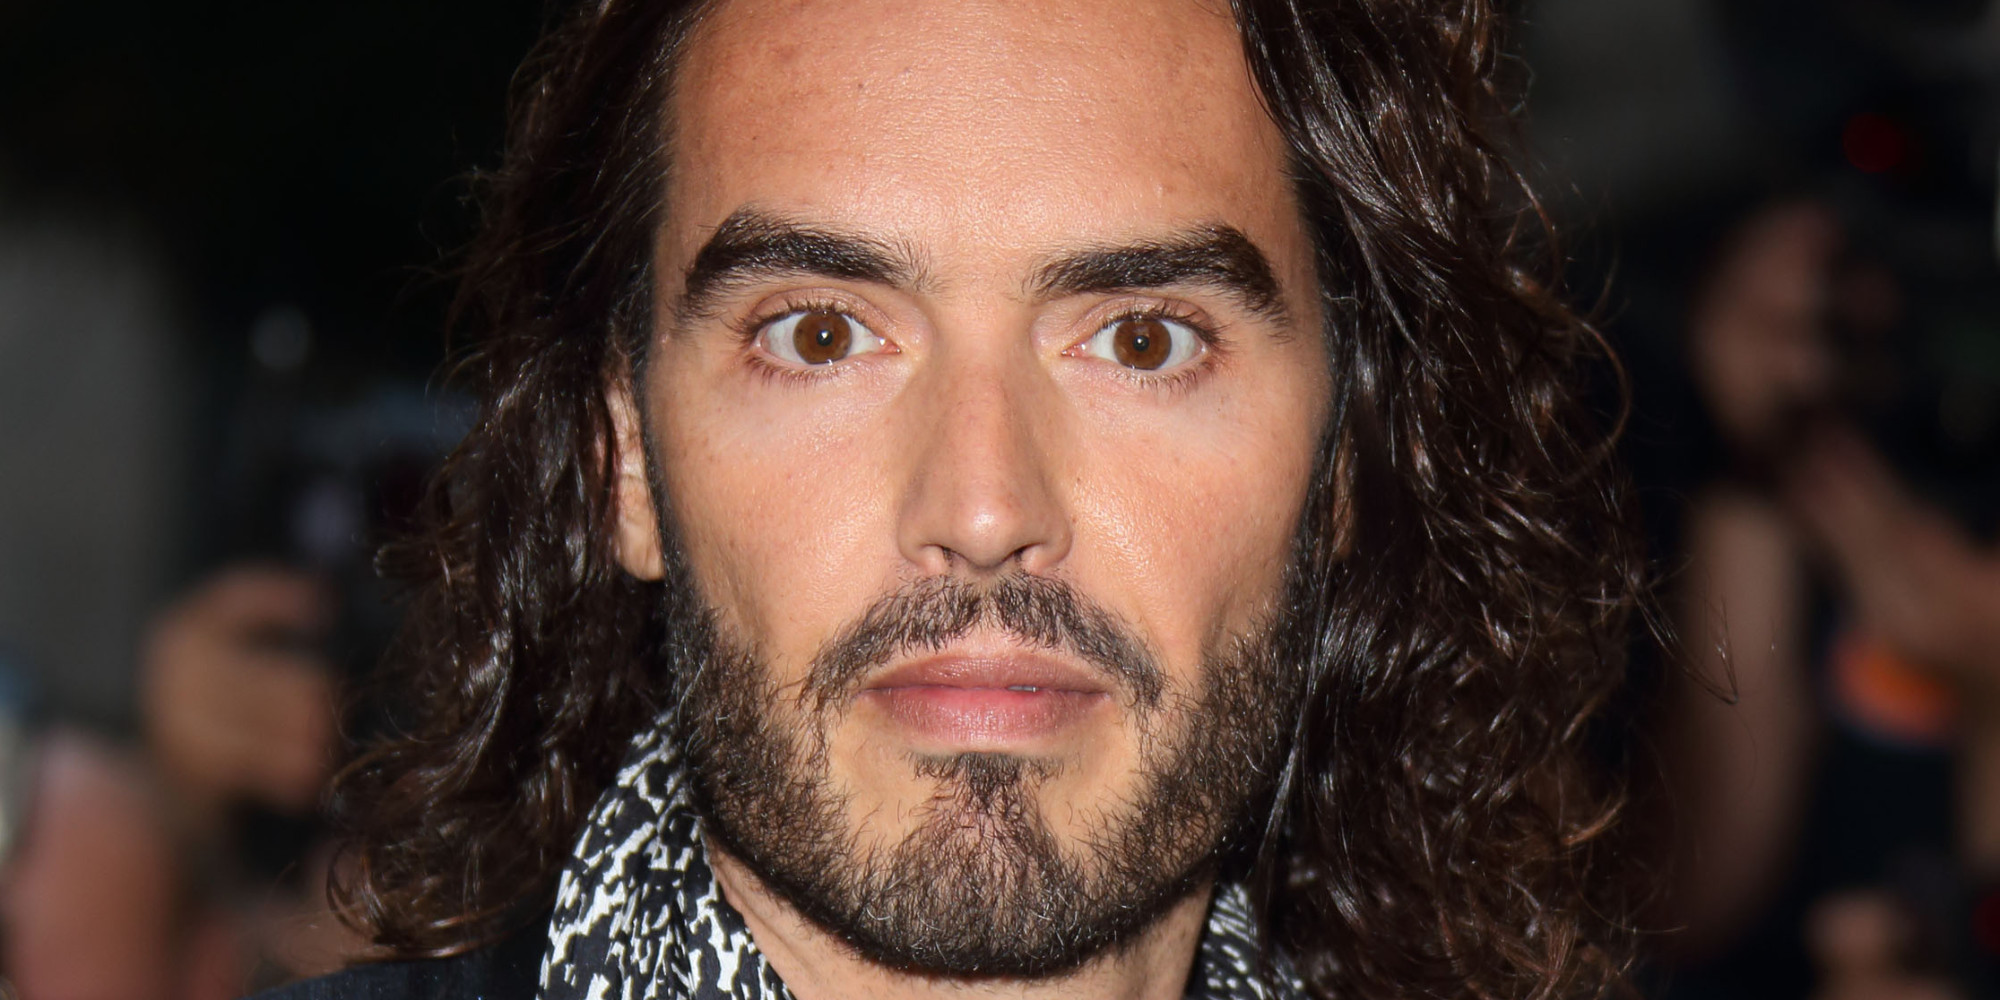 Russell Brand sexe sexe porno Images